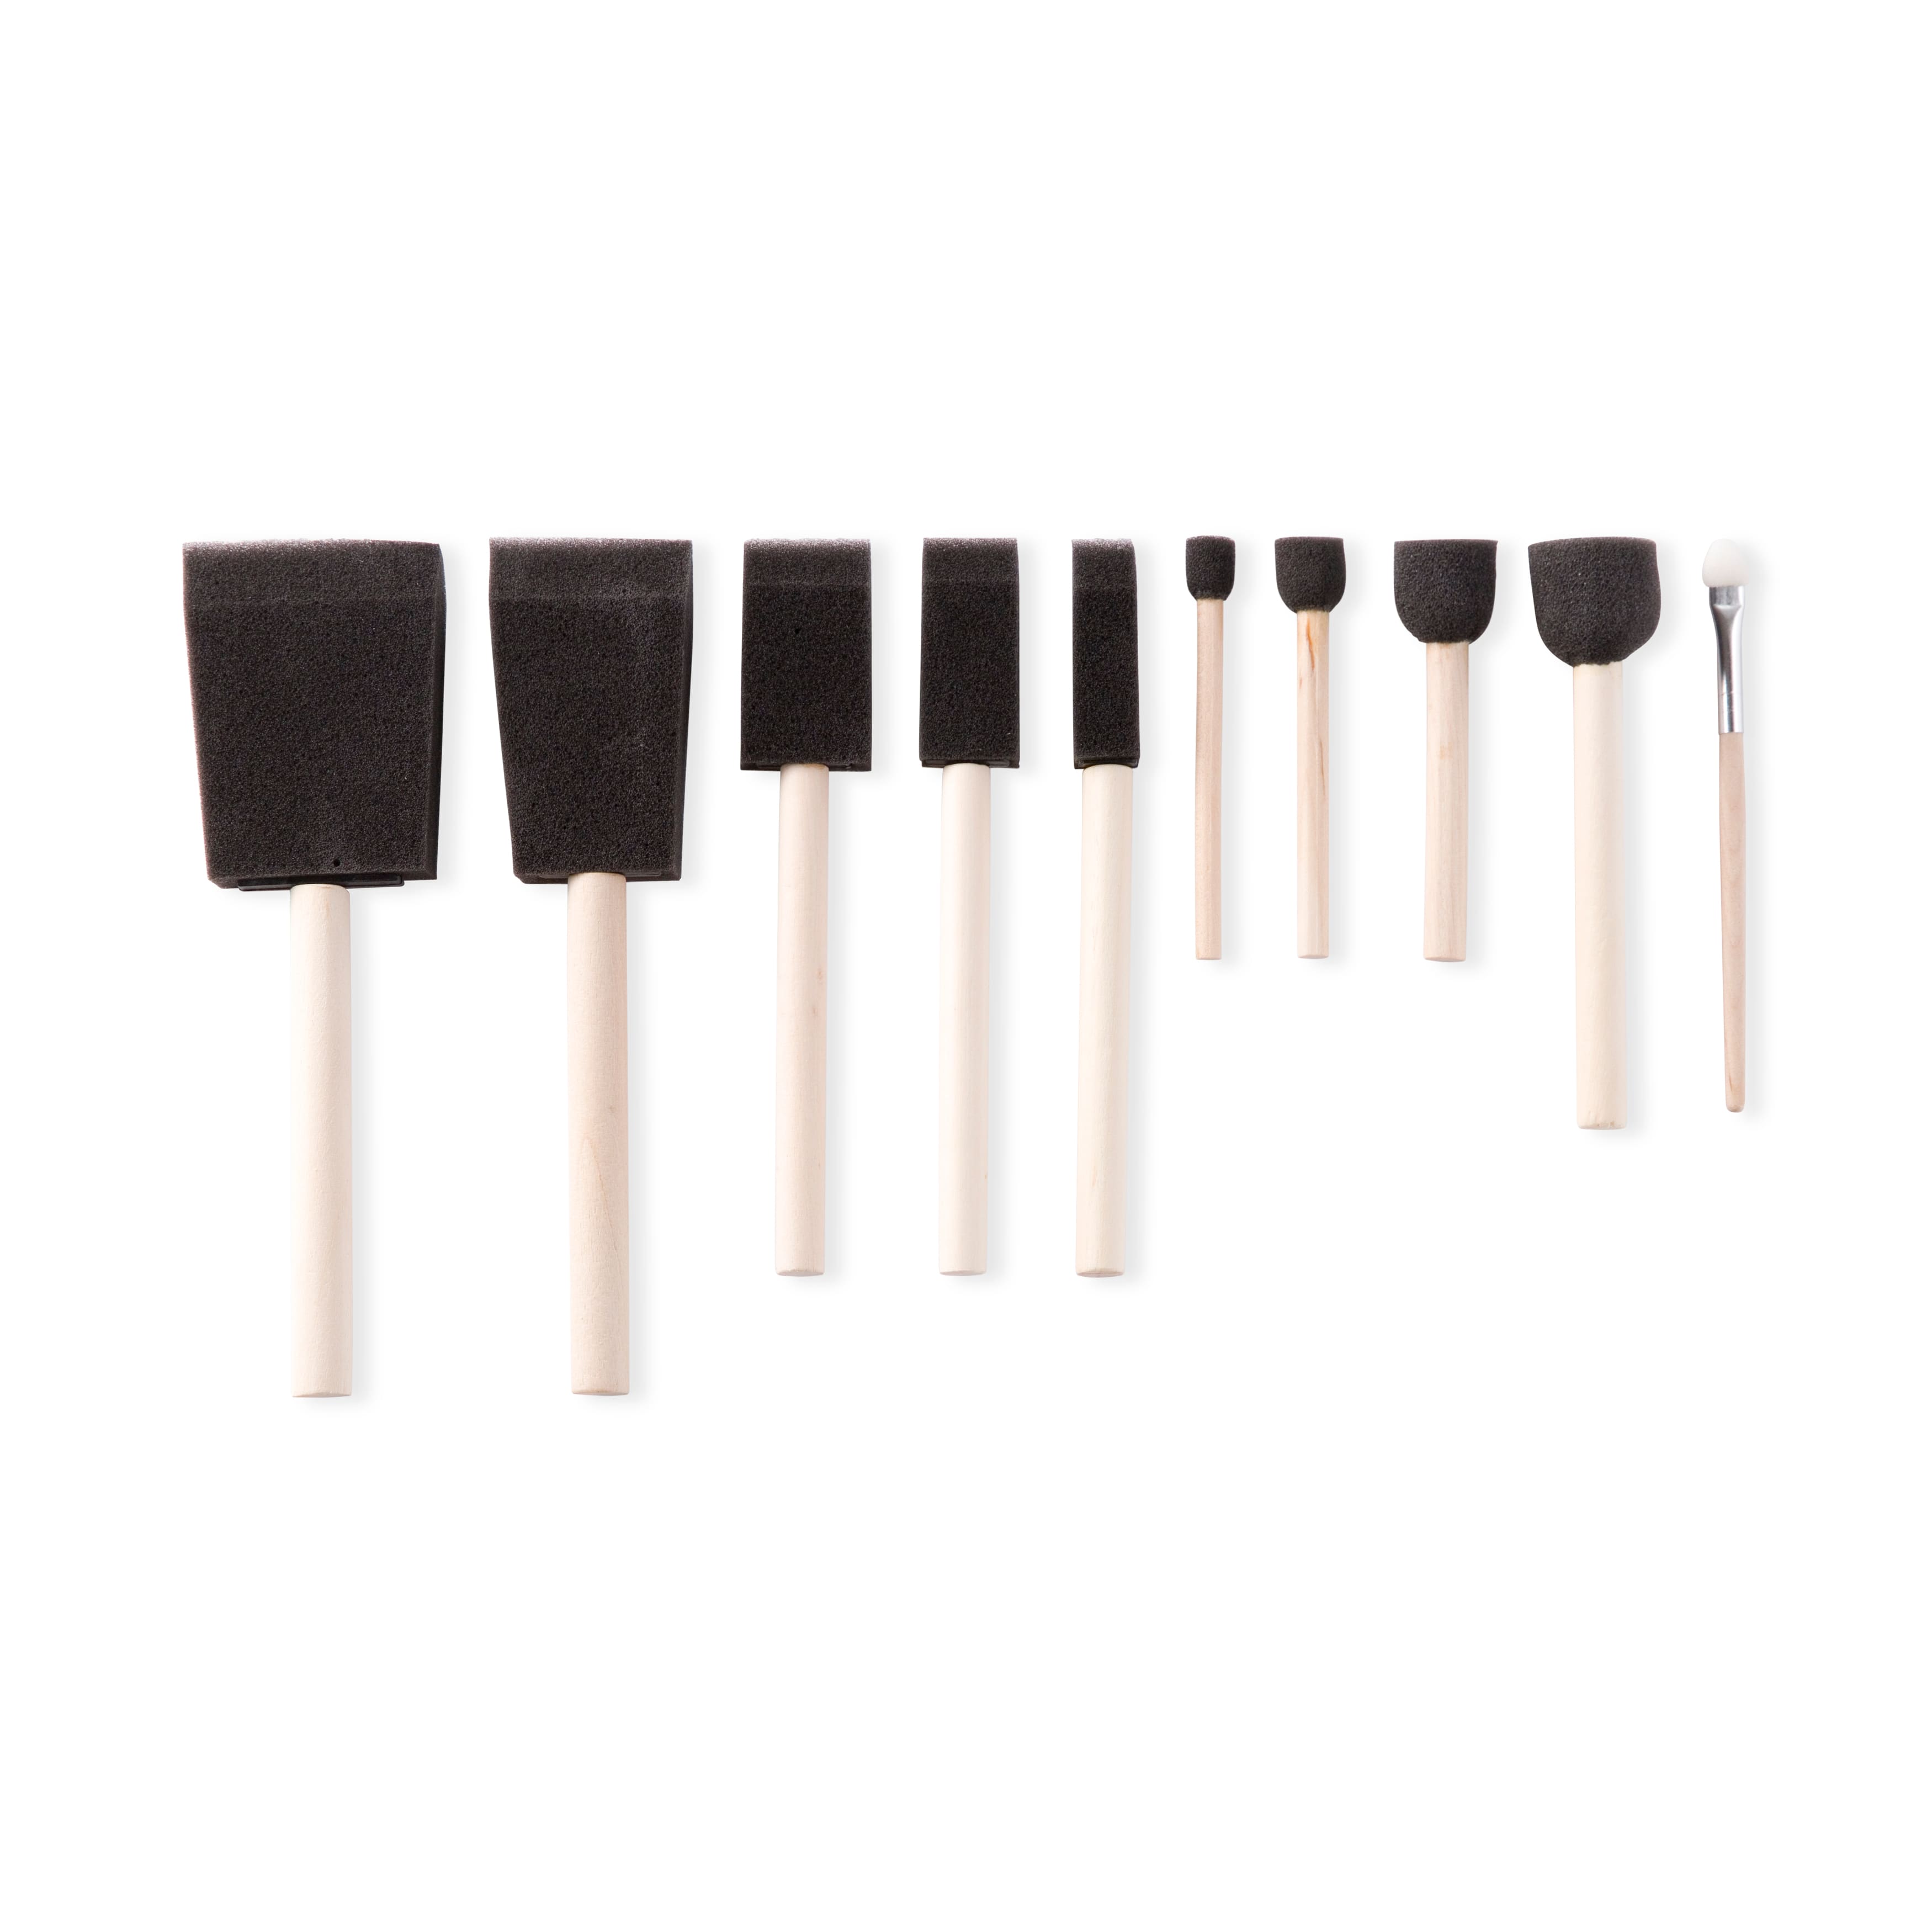 Incraftables Sponge Brushes for Painting 24pcs. Foam Brushes for